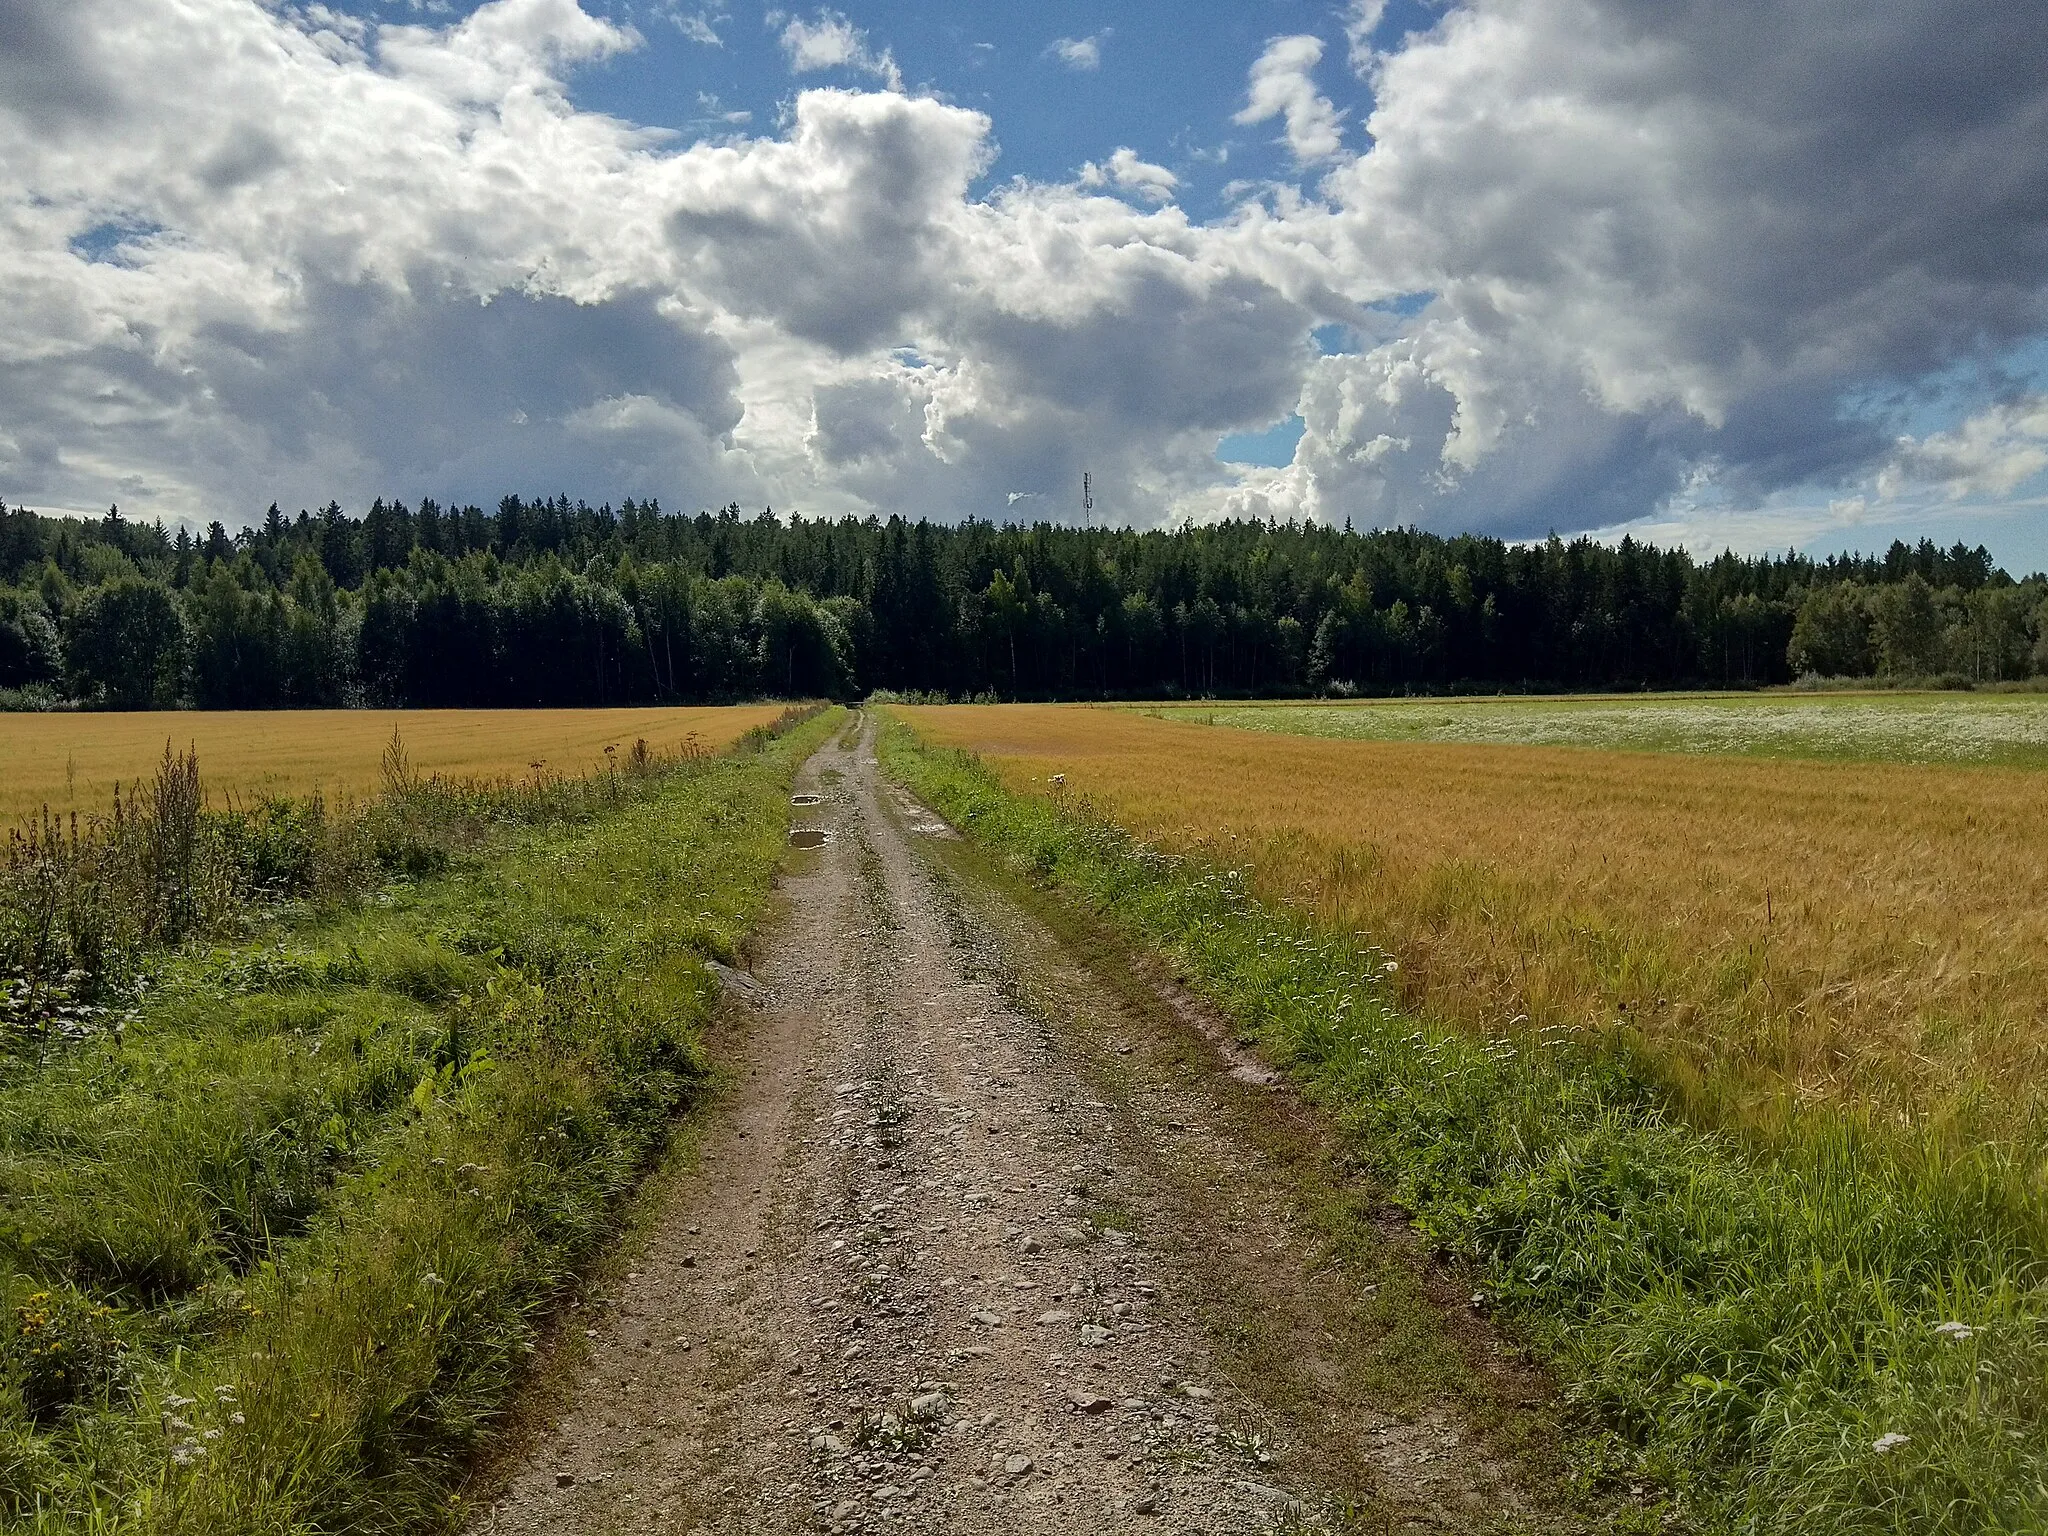 Photo showing: View from a gravel road through some fields in the outskirts of Pori, August 2020. The road in question is the southern part of Myyrynkuja, which runs into the forest immediately behind the camera view.